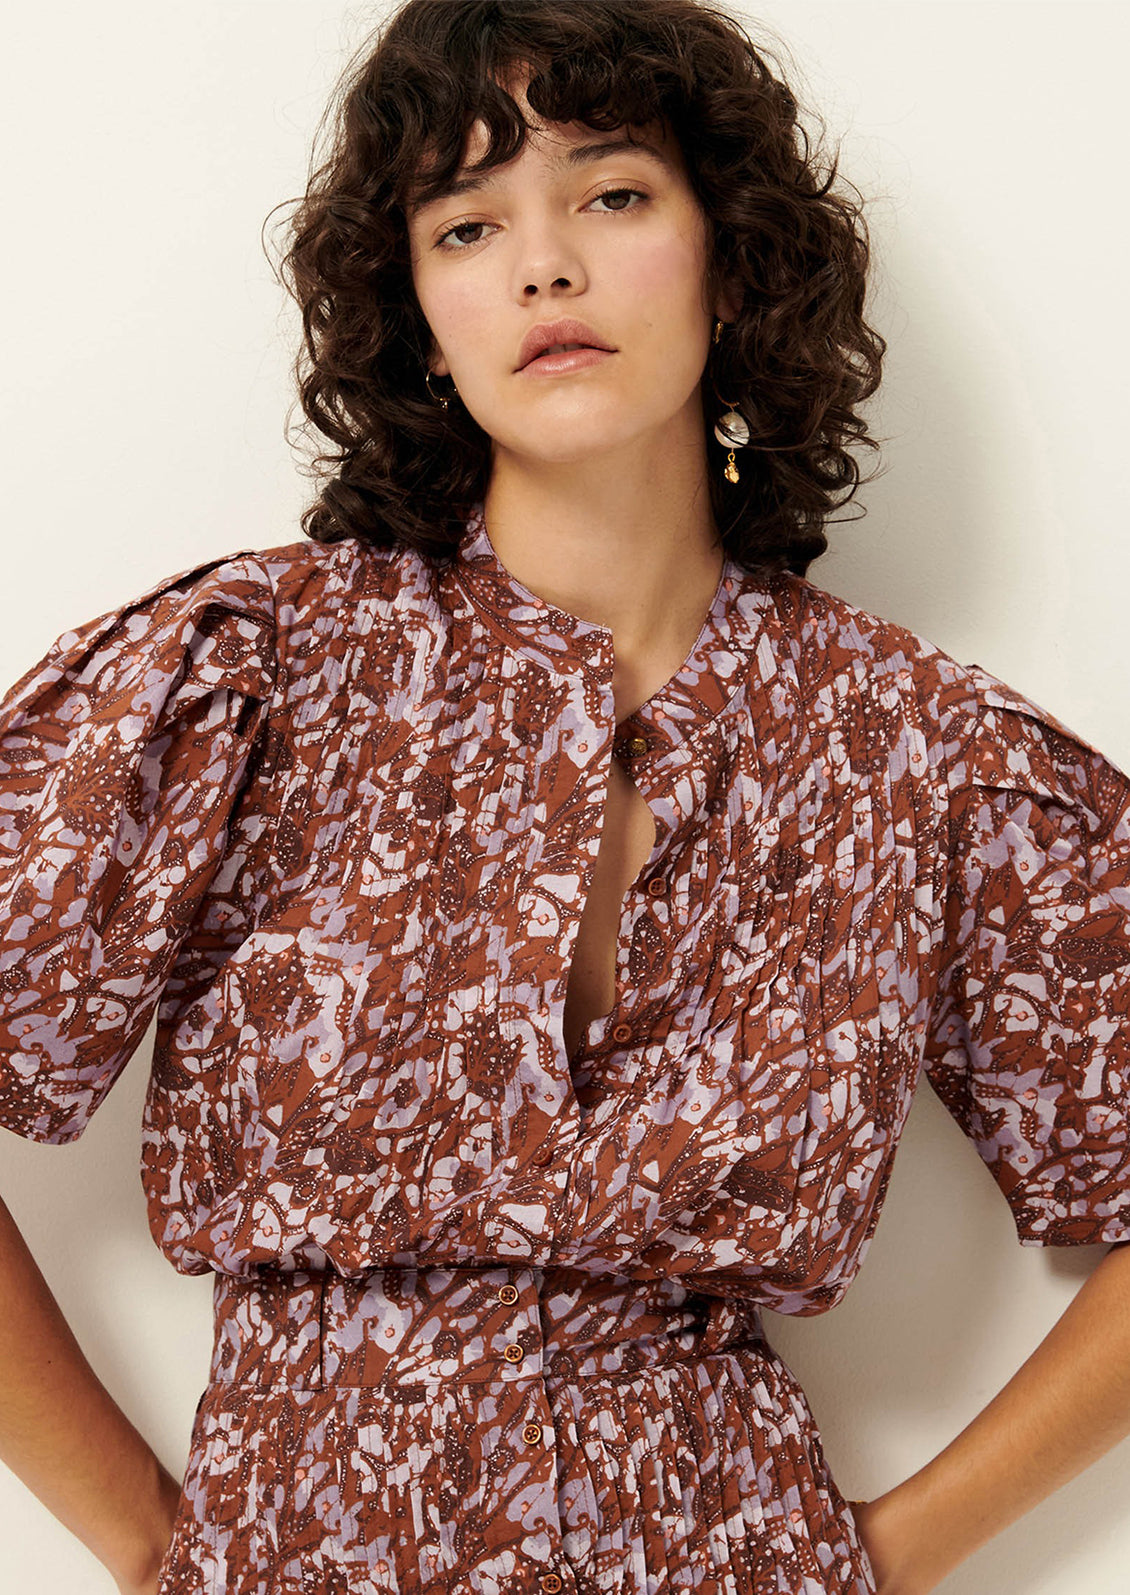 A woman wearing an abstract printed purple and rust colored button up top with short sleeves.